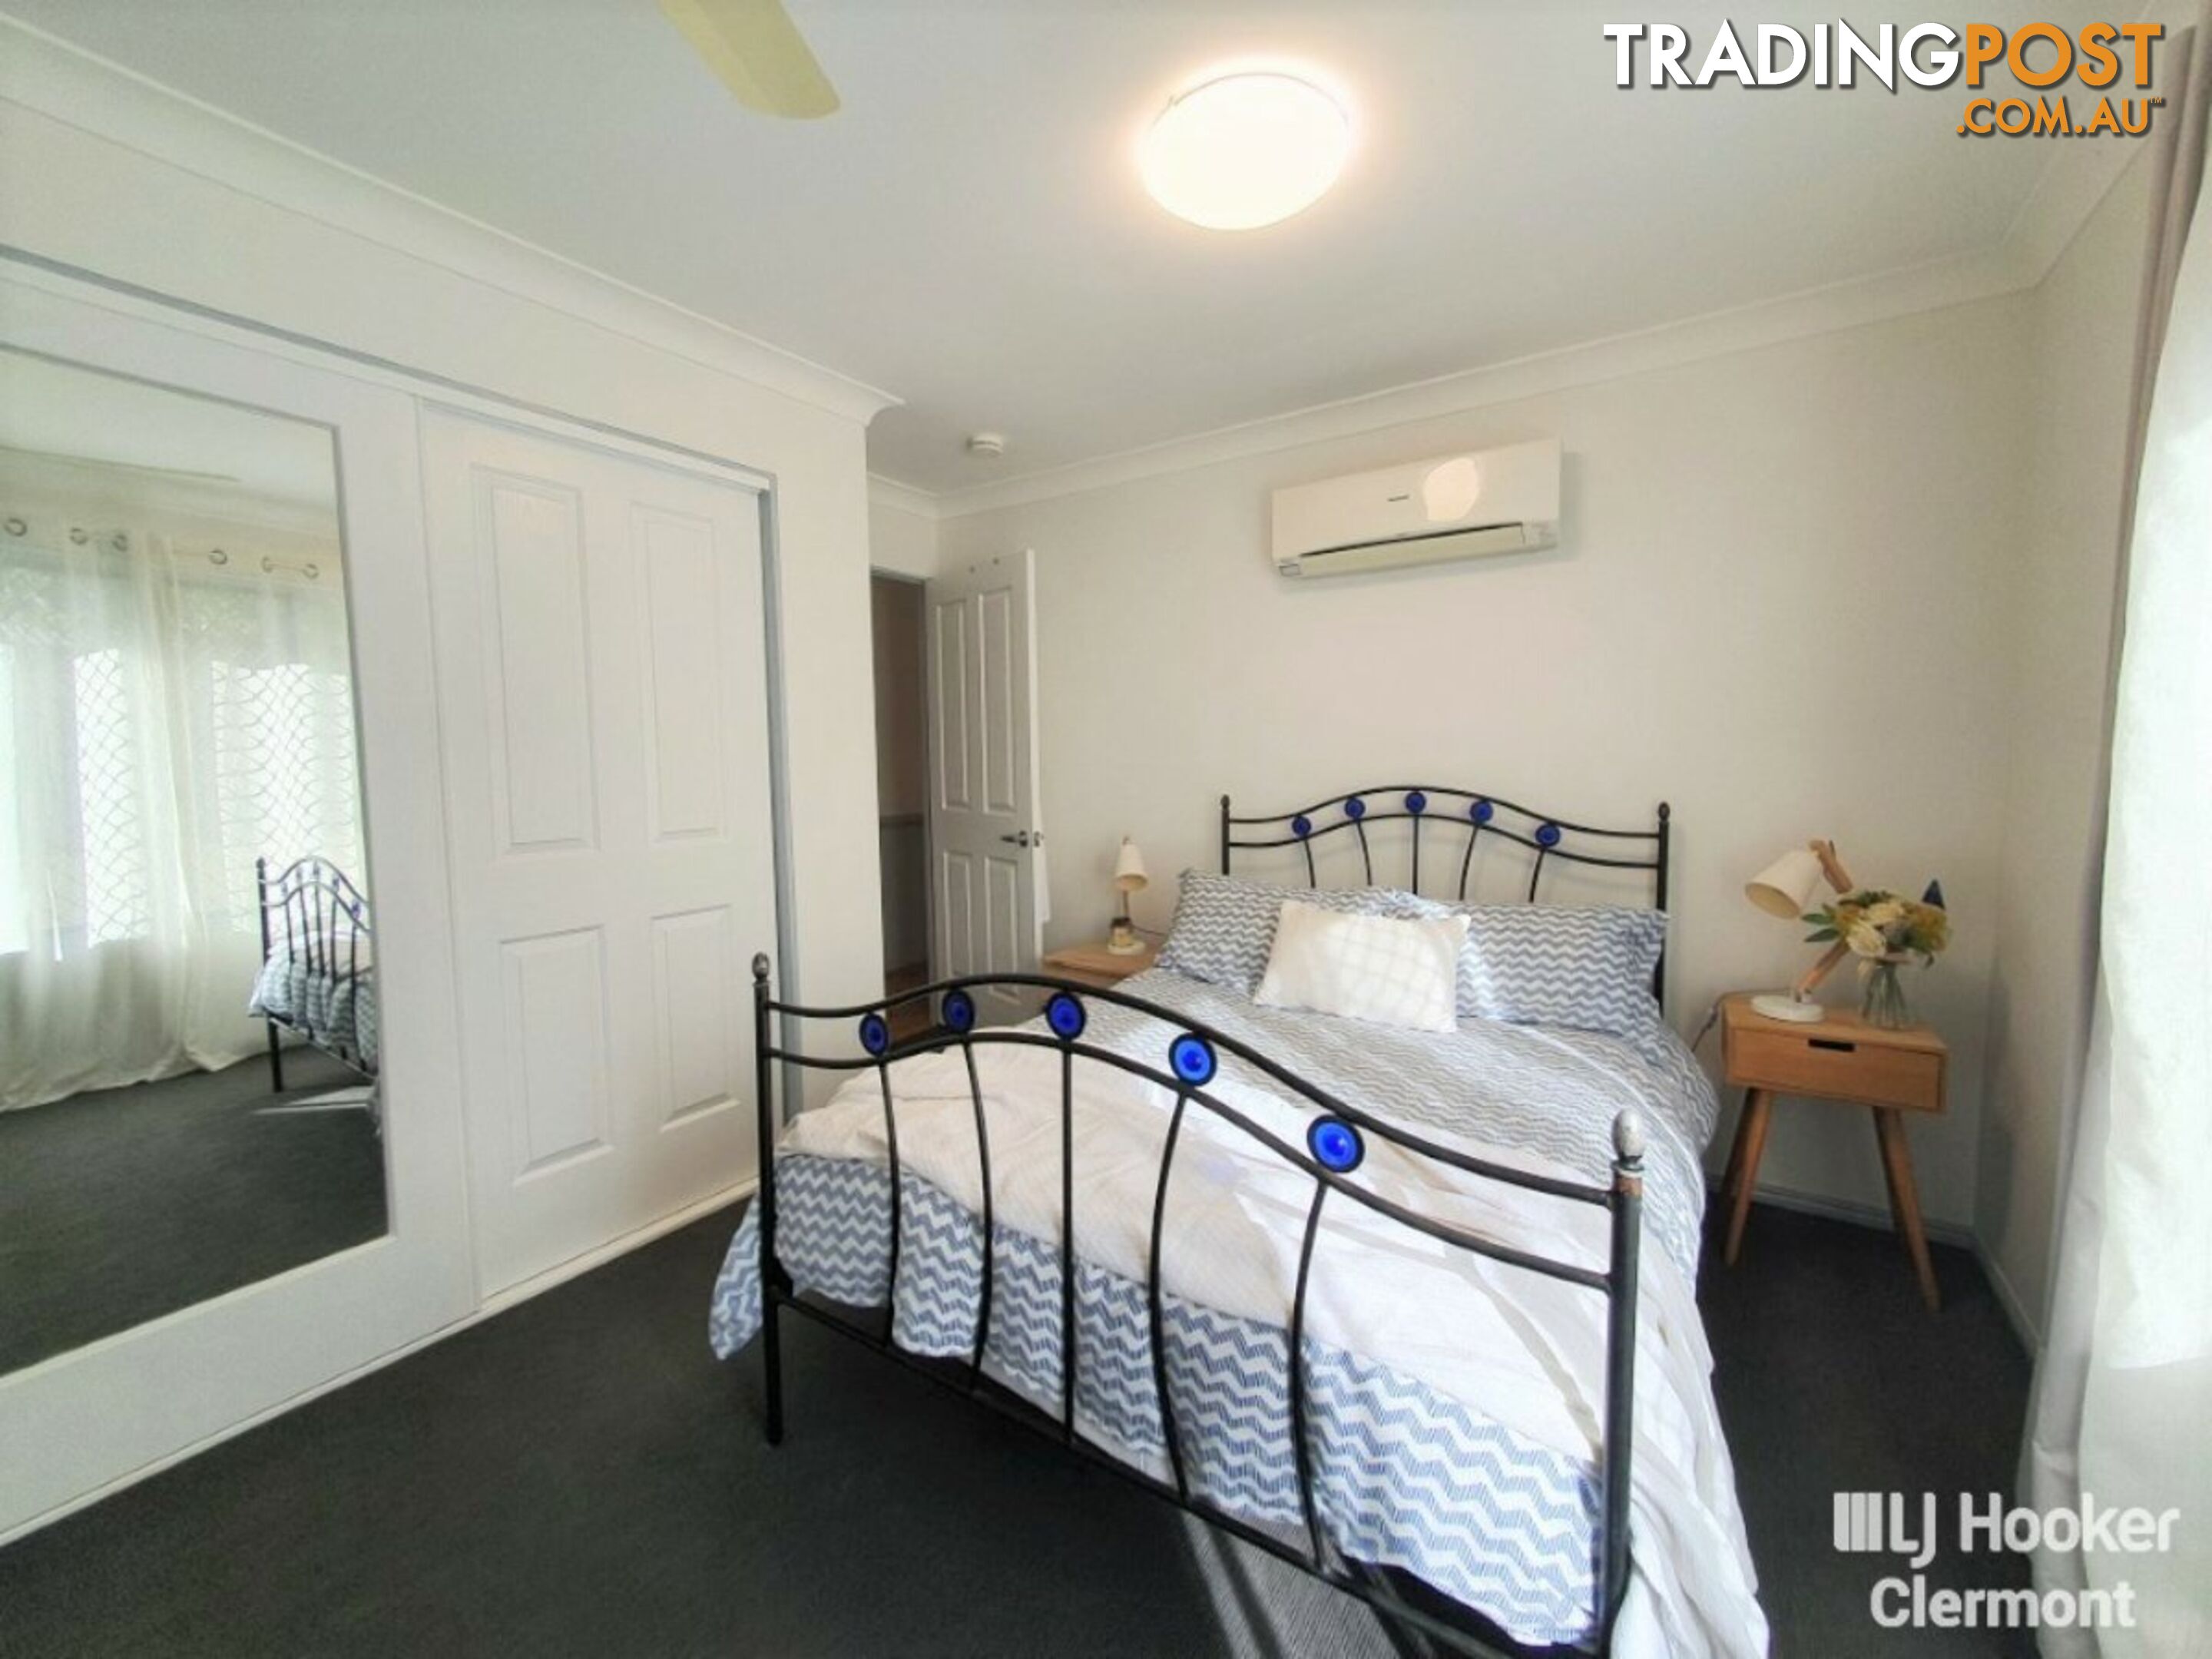 11 Tropic Street CLERMONT QLD 4721